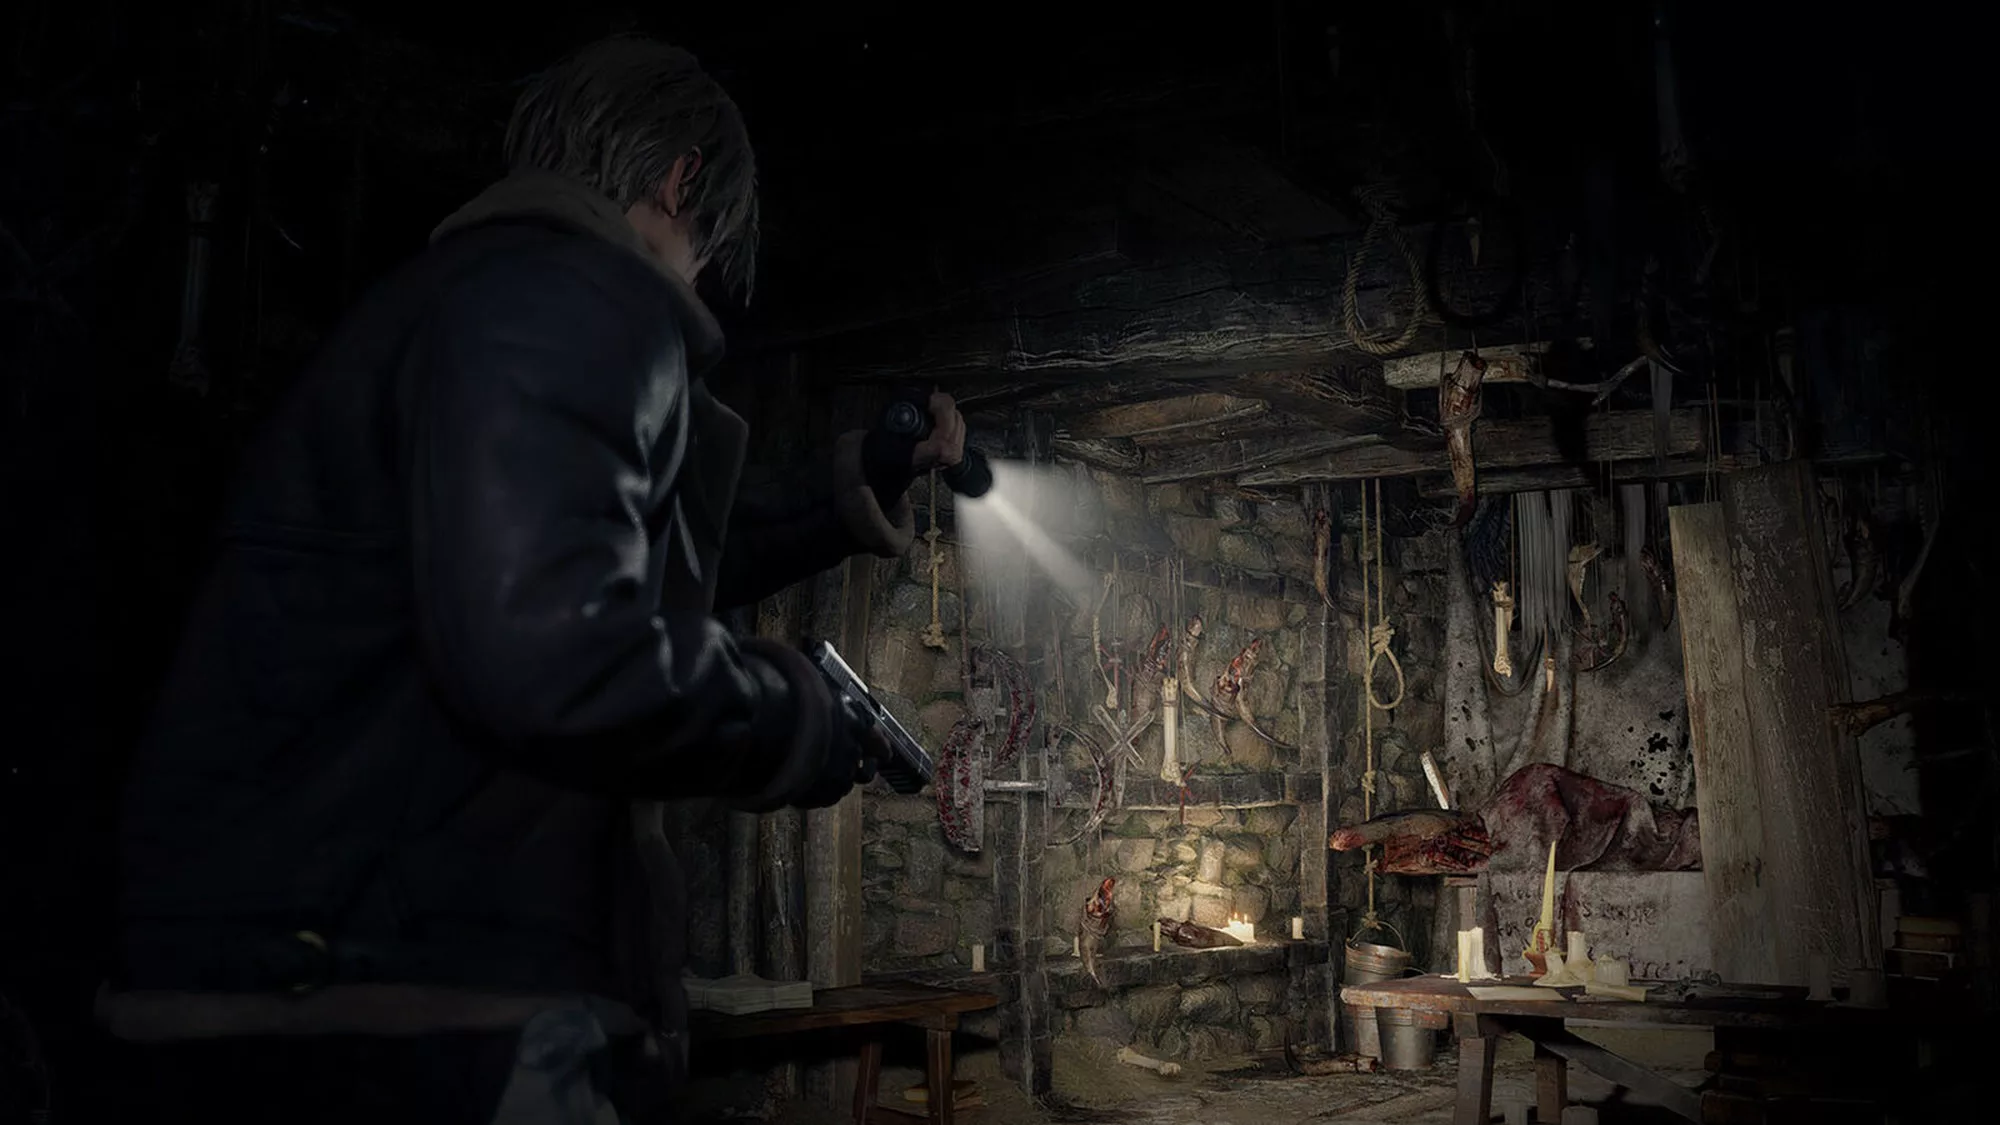 Gameplay screenshot from Resident Evil 4 showing the character moving through a creepy basement